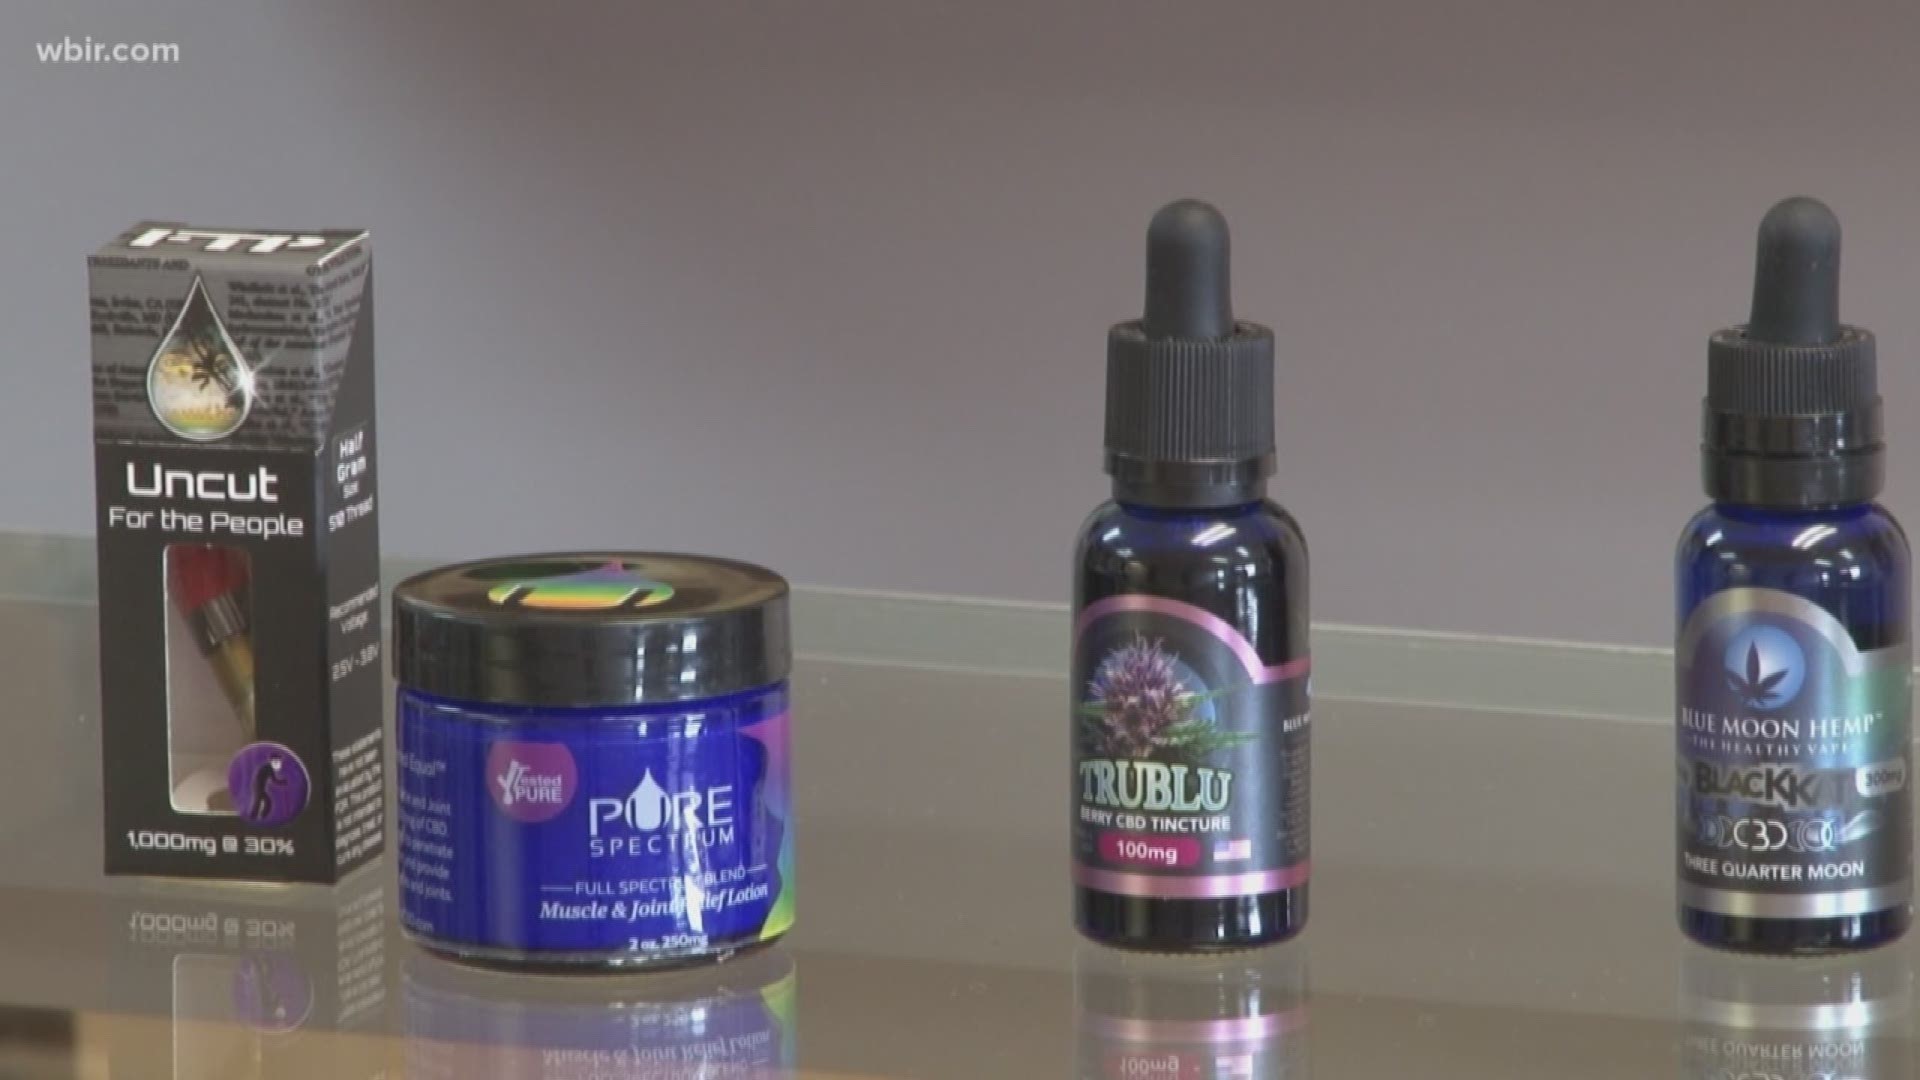 Experts say CBD products can take away your pain and help your body relax. But one pharmacist says to make sure you've checked with a medical professional before taking it.